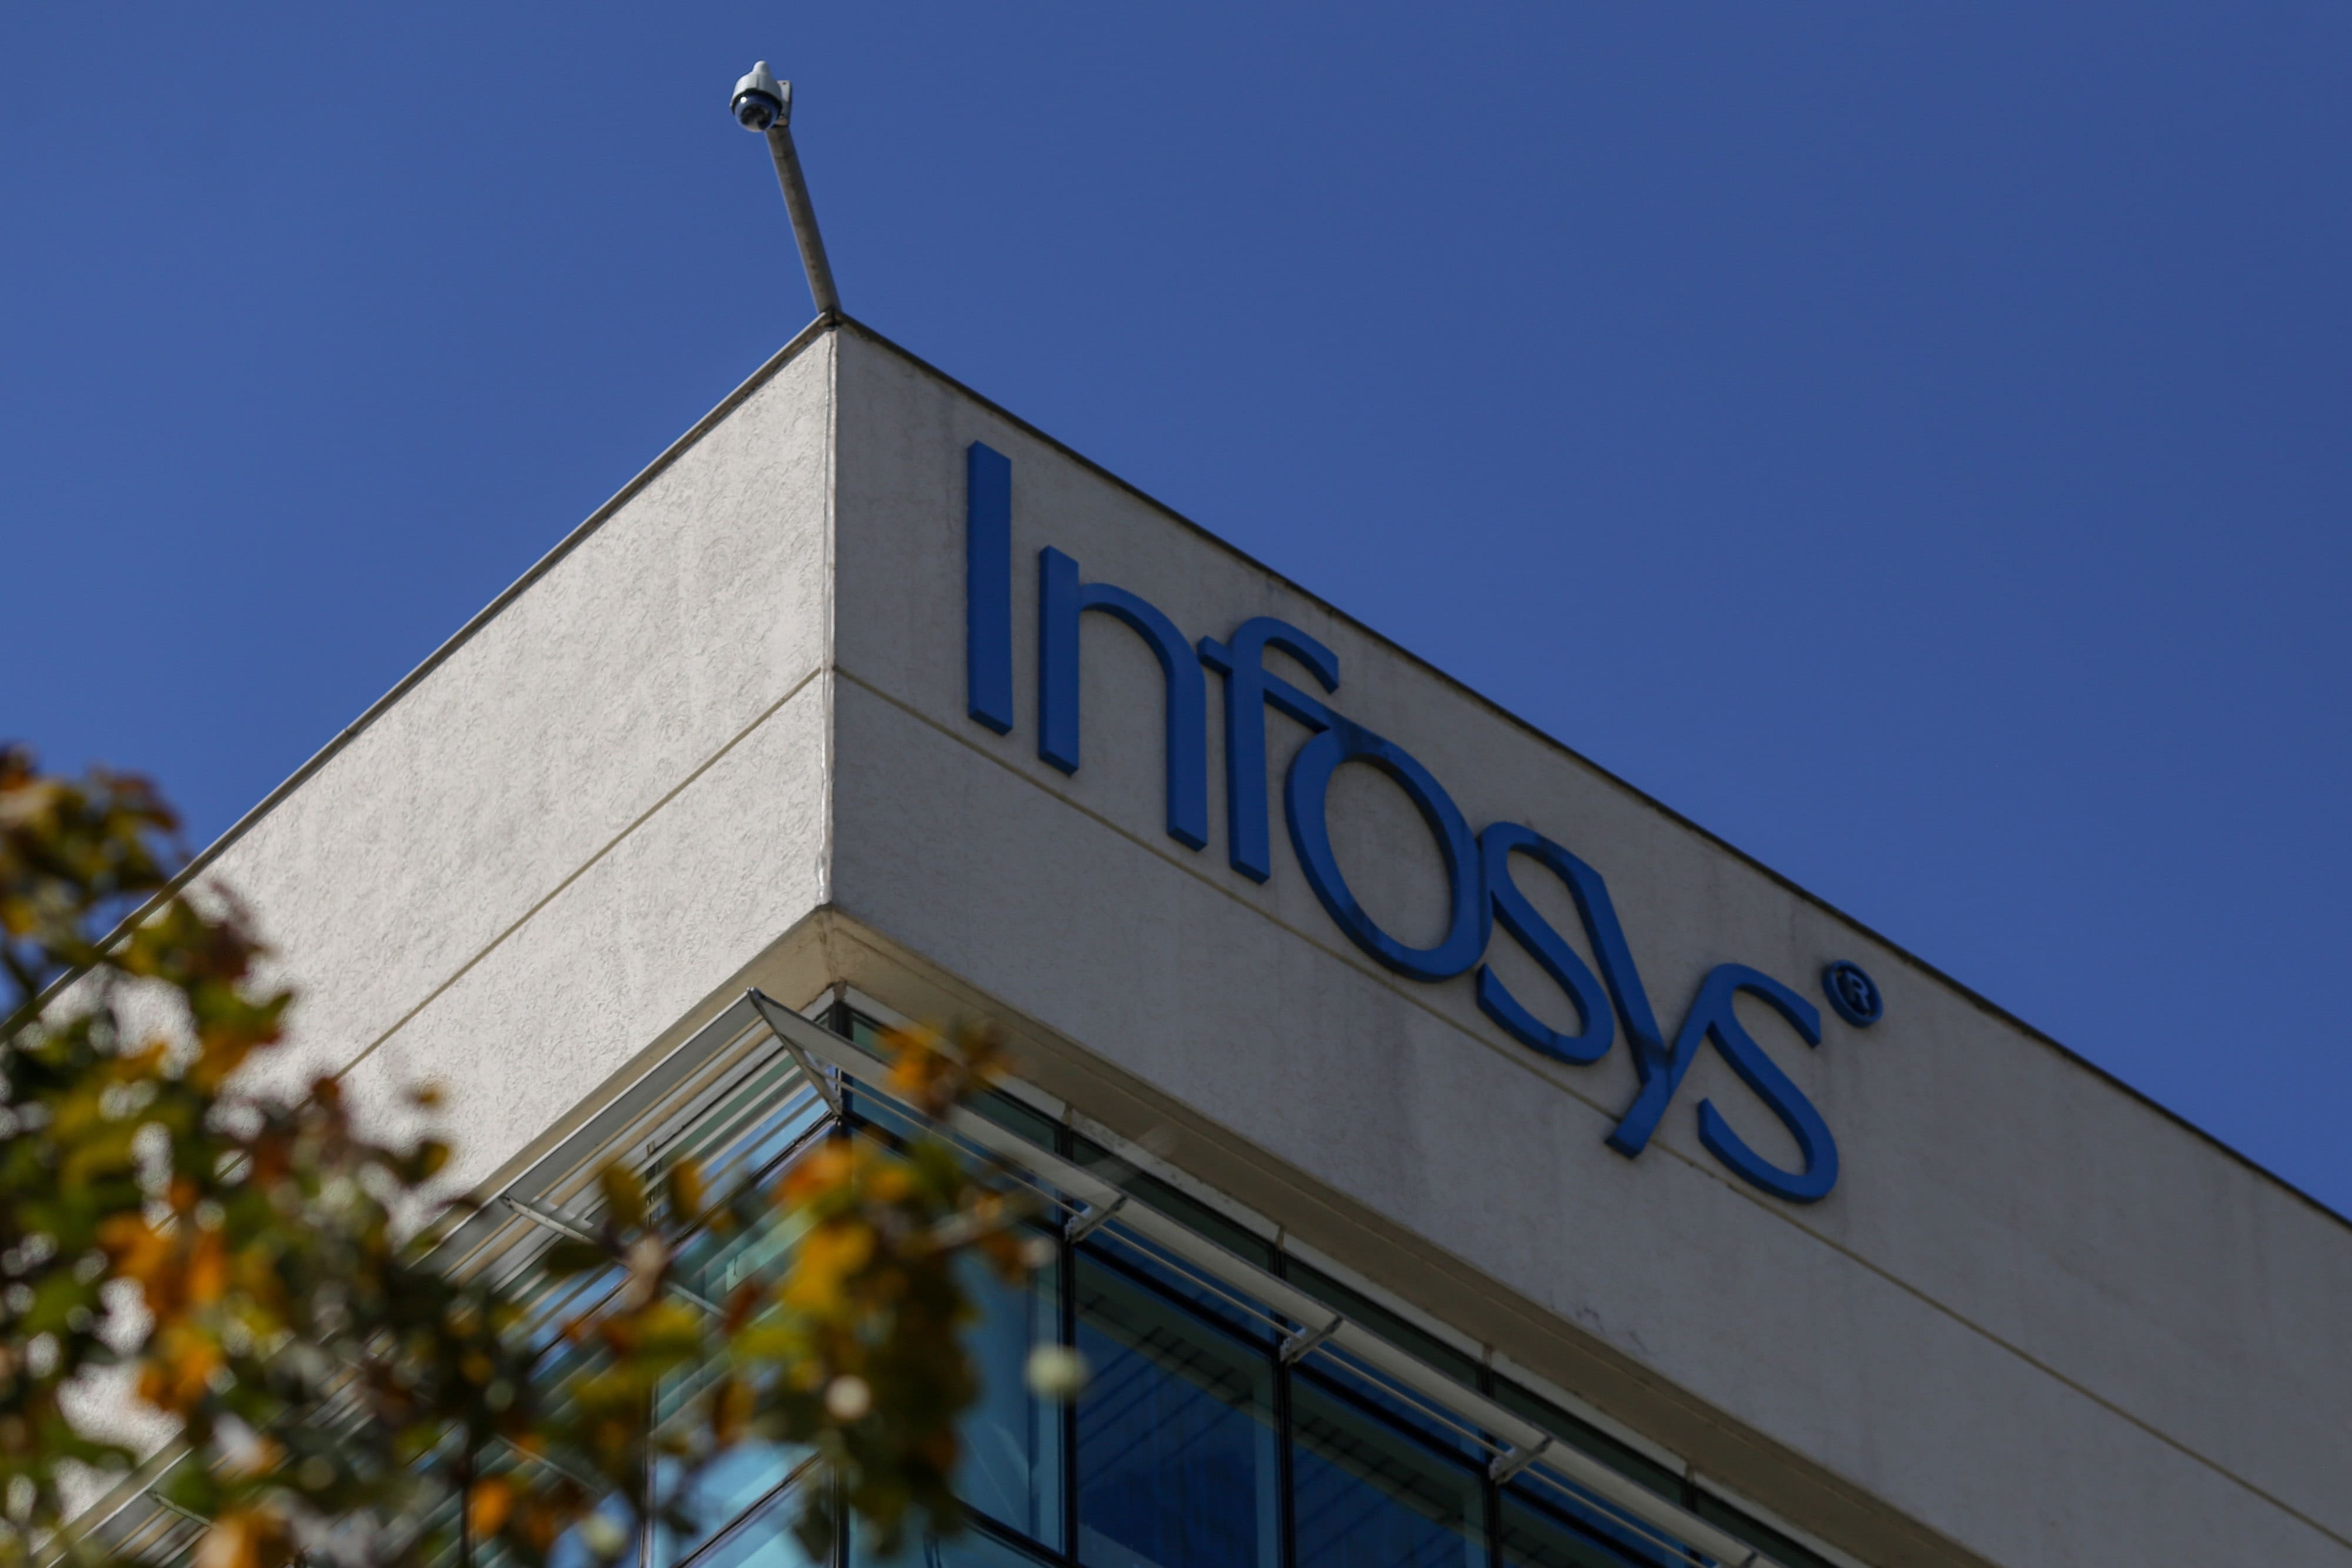 Infosys: The brokerage has given a target price of  <span class='webrupee'>₹</span>2,150 to the IT major, indicating an upside of 17 percent from its CMP of  <span class='webrupee'>₹</span>1,839 on March 15, 2022. Despite the massive sell-off recently, the stock has lost only 6 percent from its 52-week high of  <span class='webrupee'>₹</span>1,953.70, hit on January 17, 2022. It lost only 1 percent in Feb shrugging off the Russia-Ukraine crisis and is up around 9 percent in March till now. In the last 1 year, it rose 34 percent.